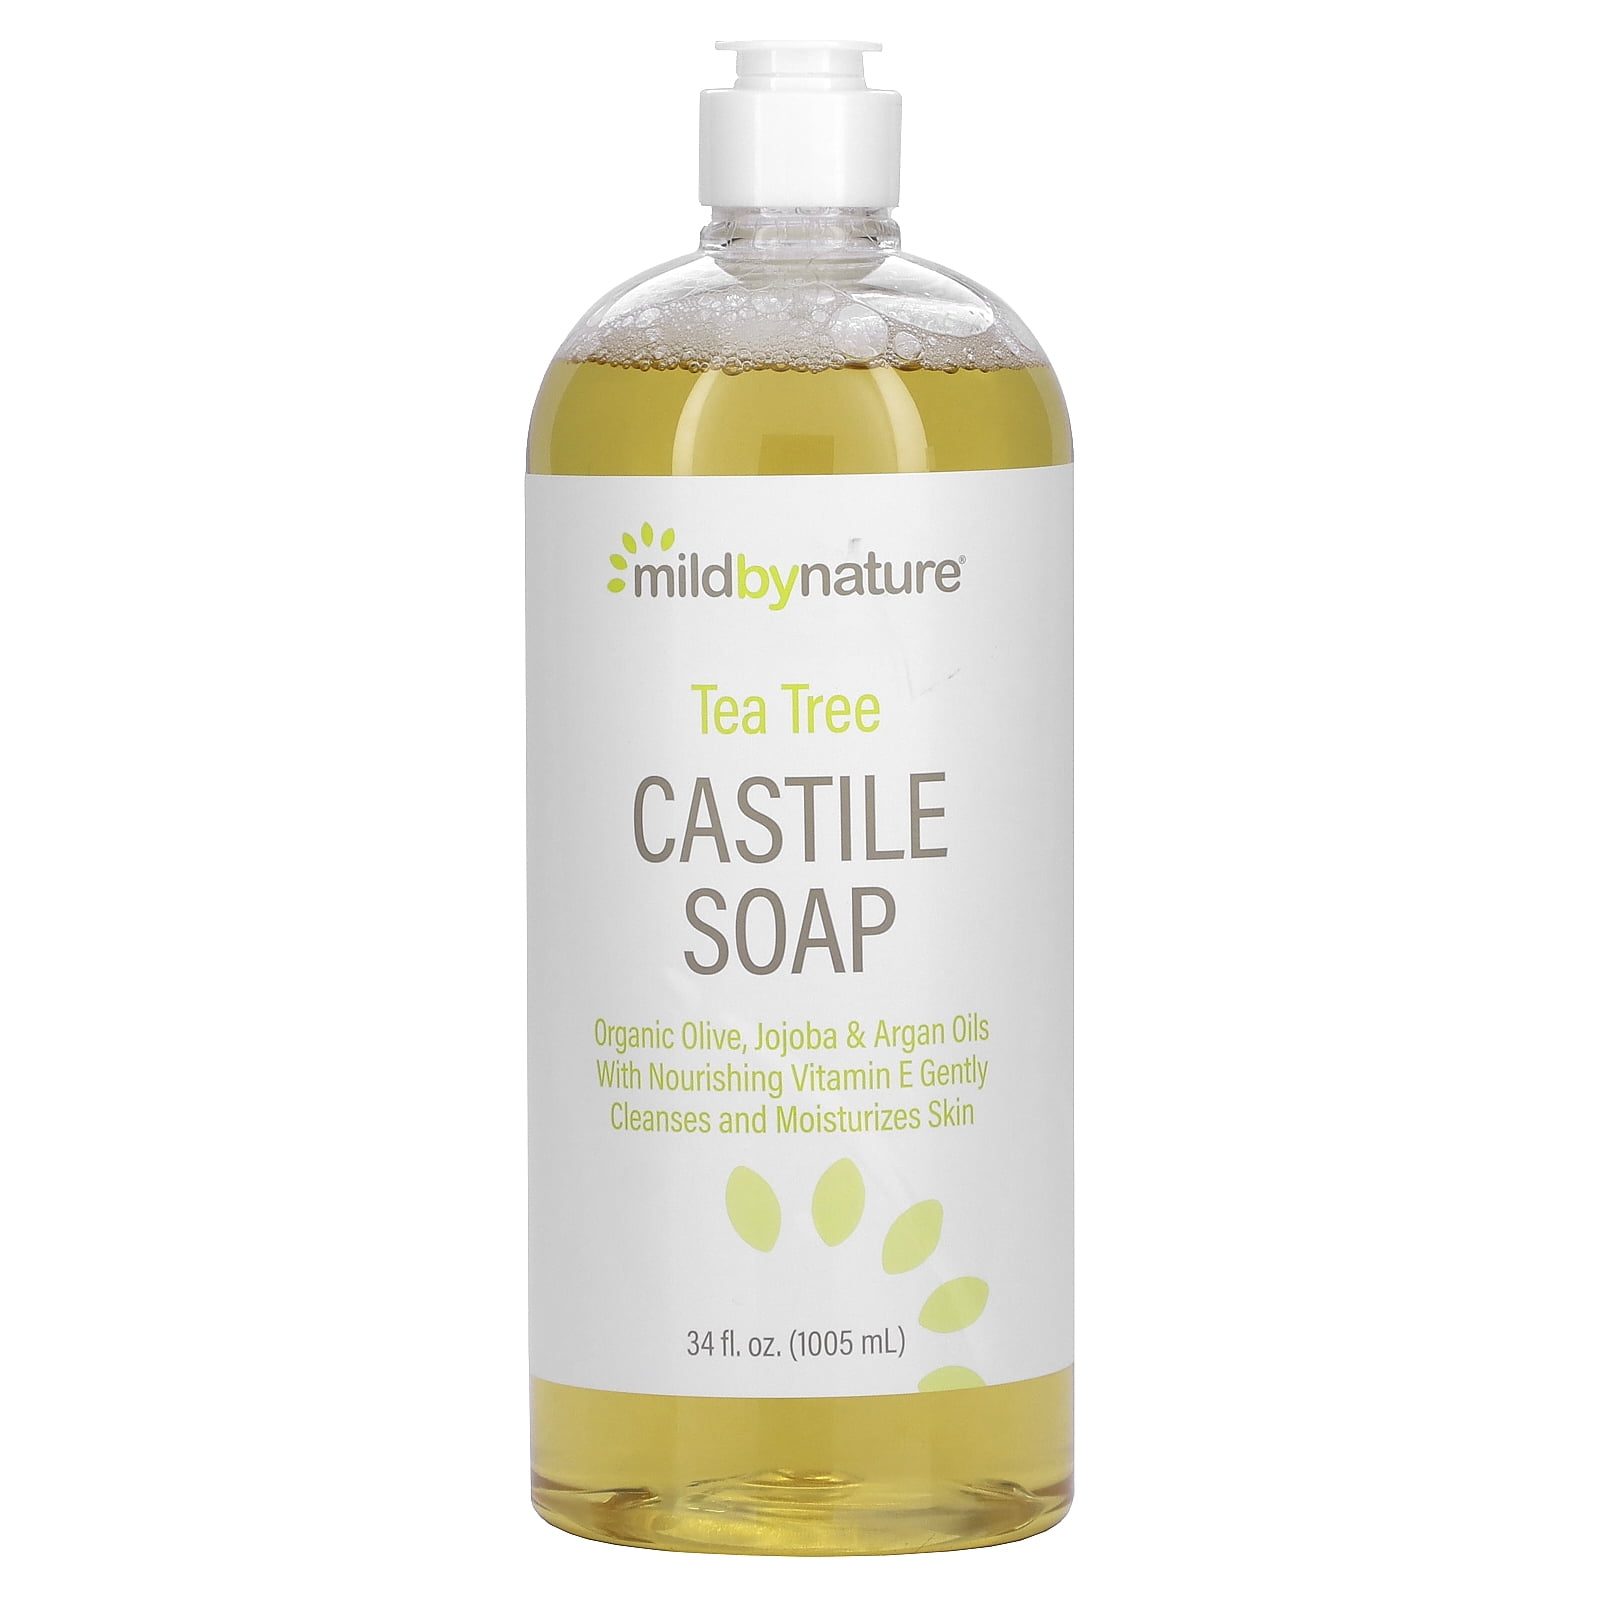 Olive Oil Types For Skin Care and Soap Making - Featuring Castile Soap -  Soap Making School